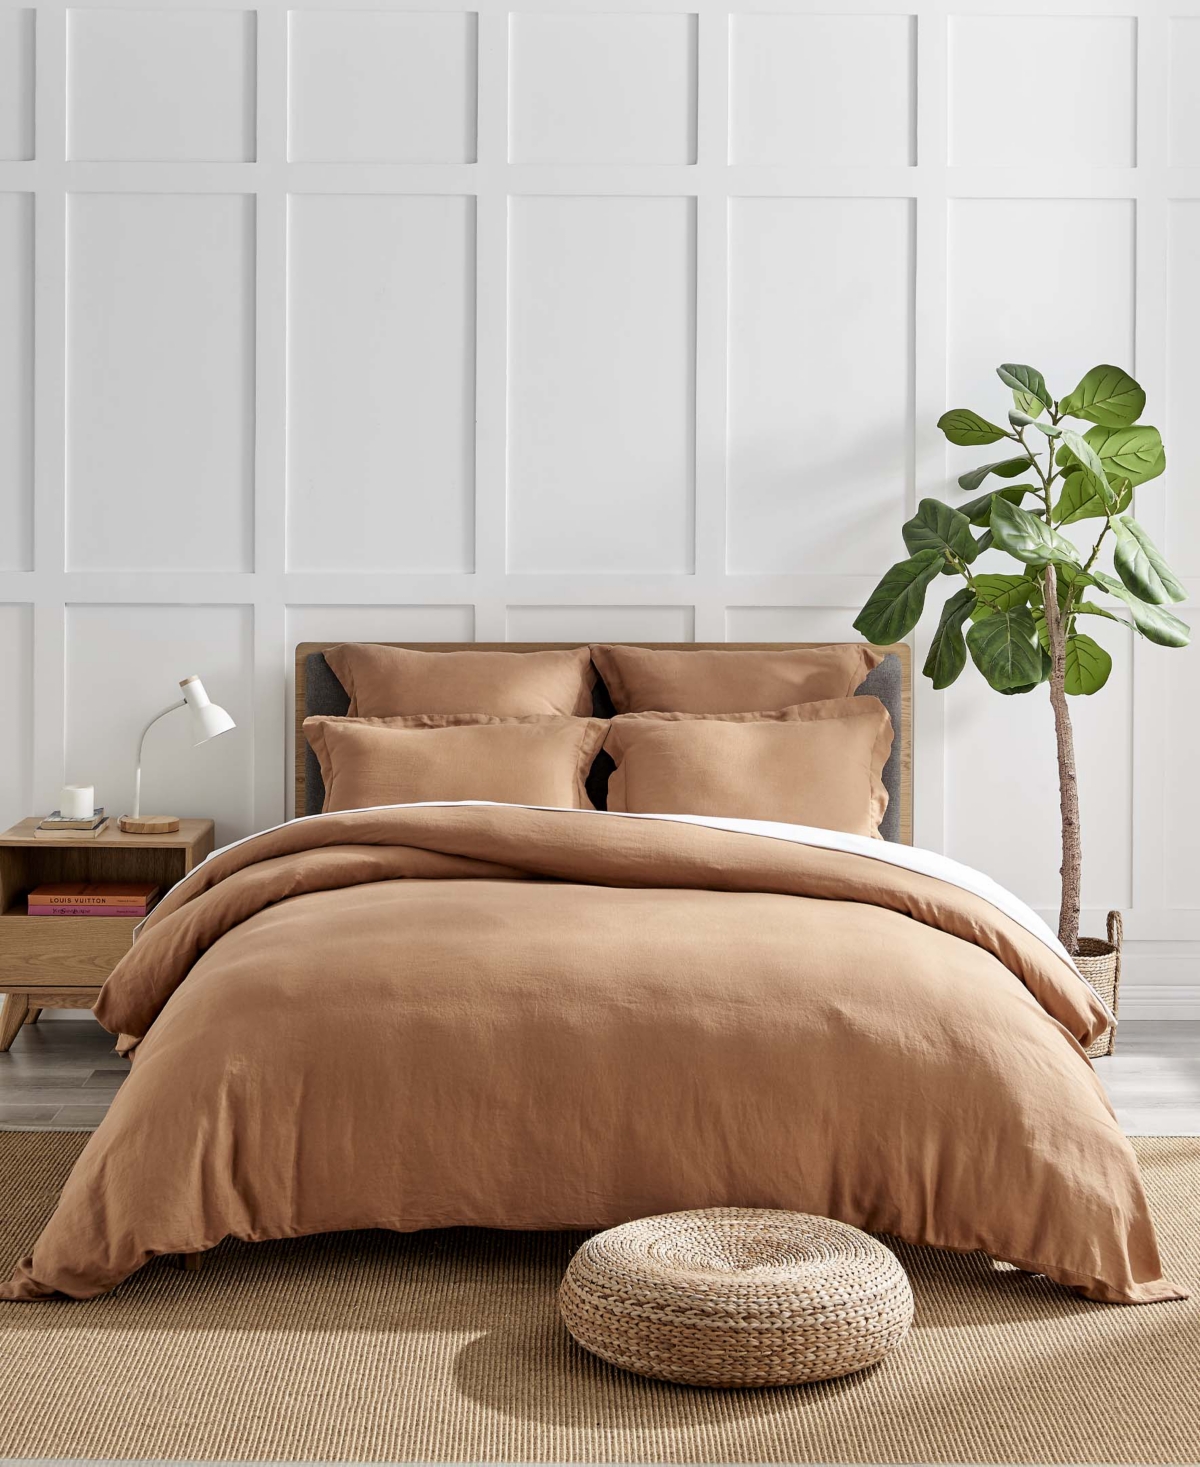 Levtex Washed Linen Solid Duvet Cover, King/california King In Brown